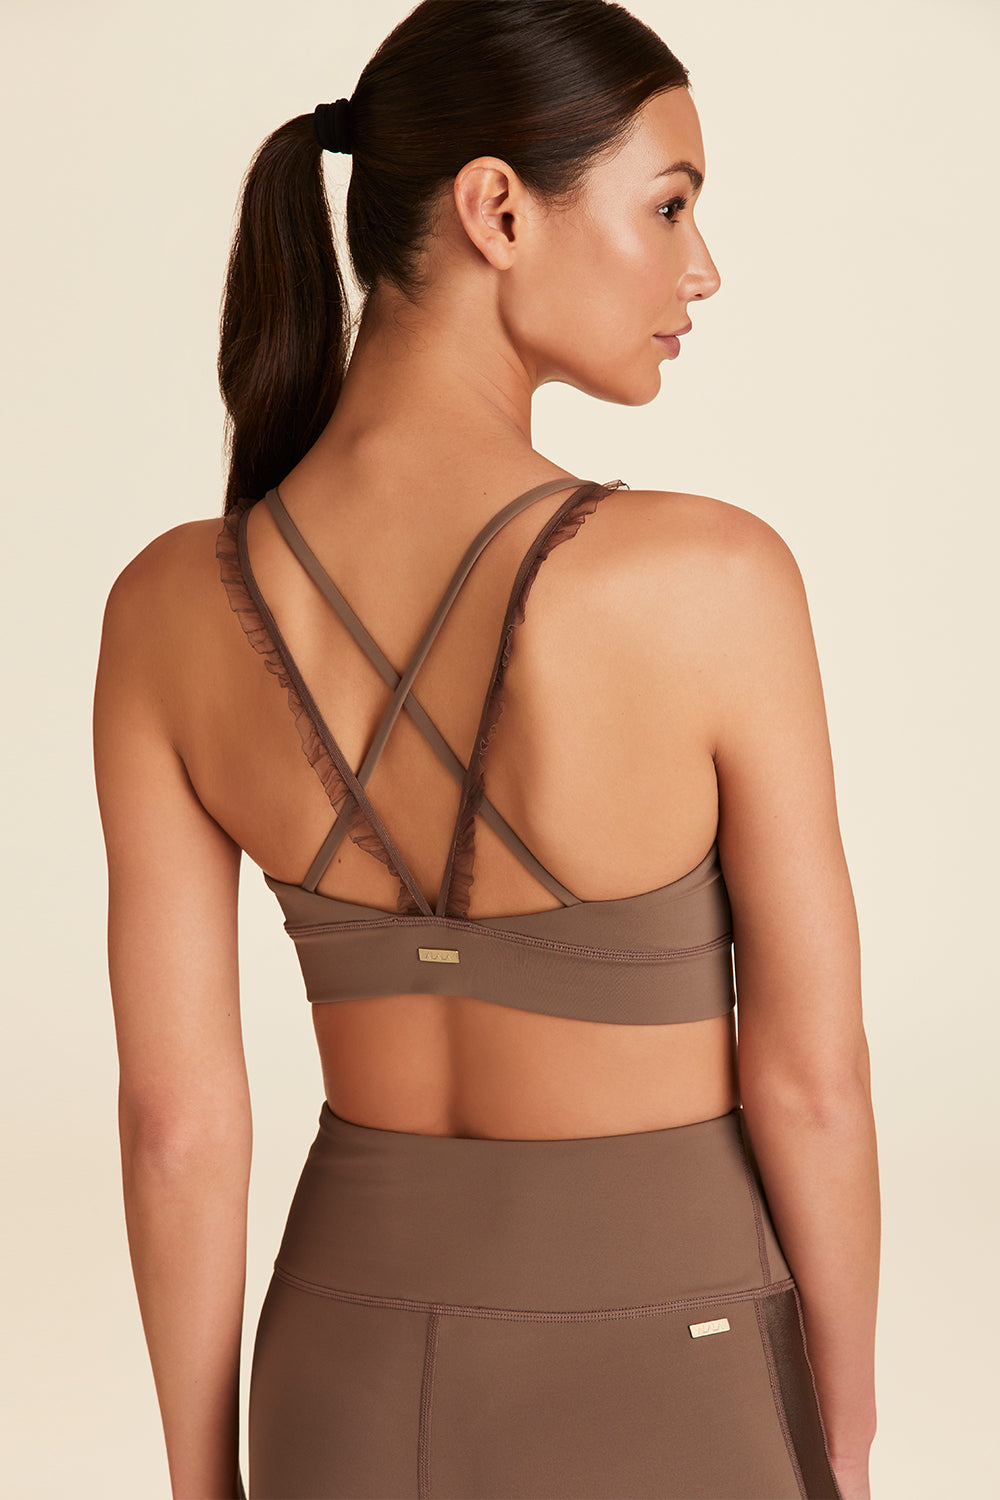 Extra 25% Off for Members: 100s of Styles Added Walking Medium Support  Sports Bras.